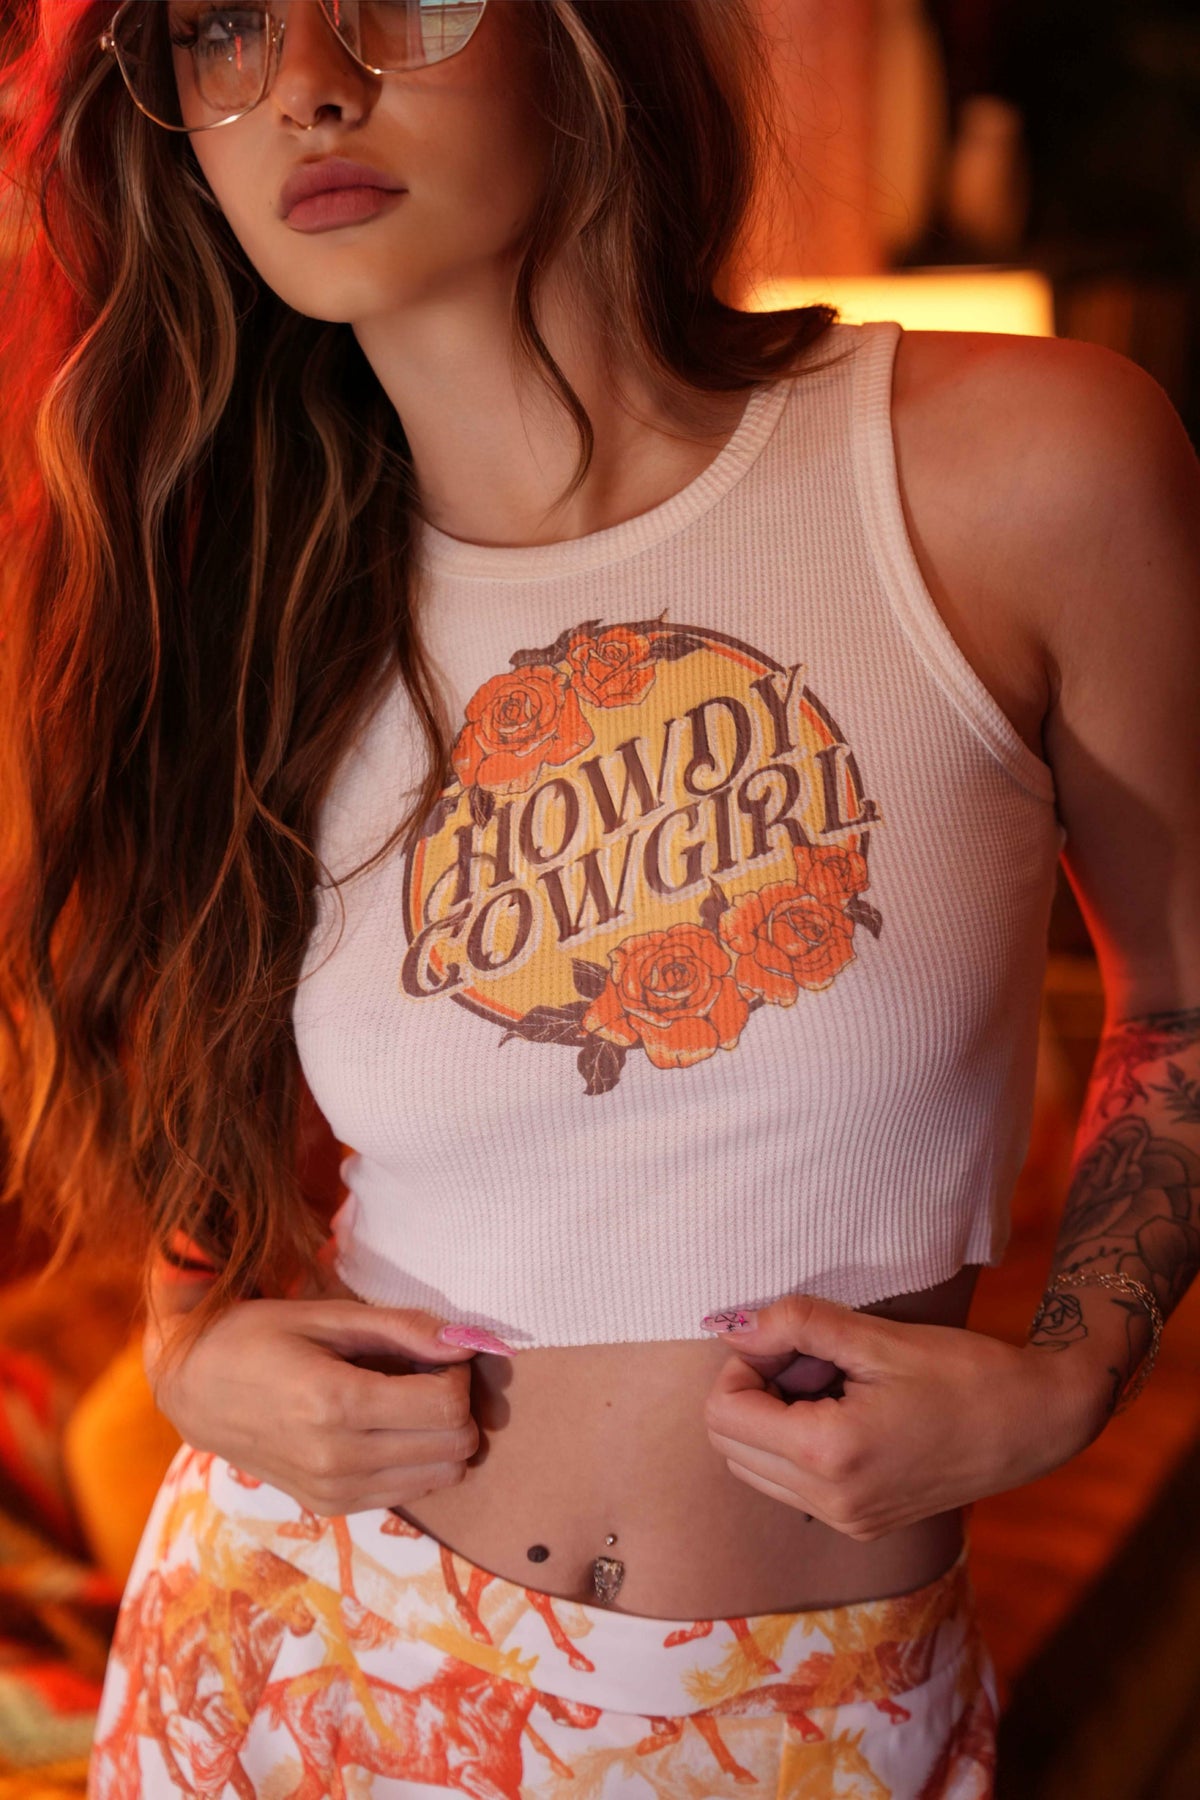 Howdy Cowgirl Tank Top